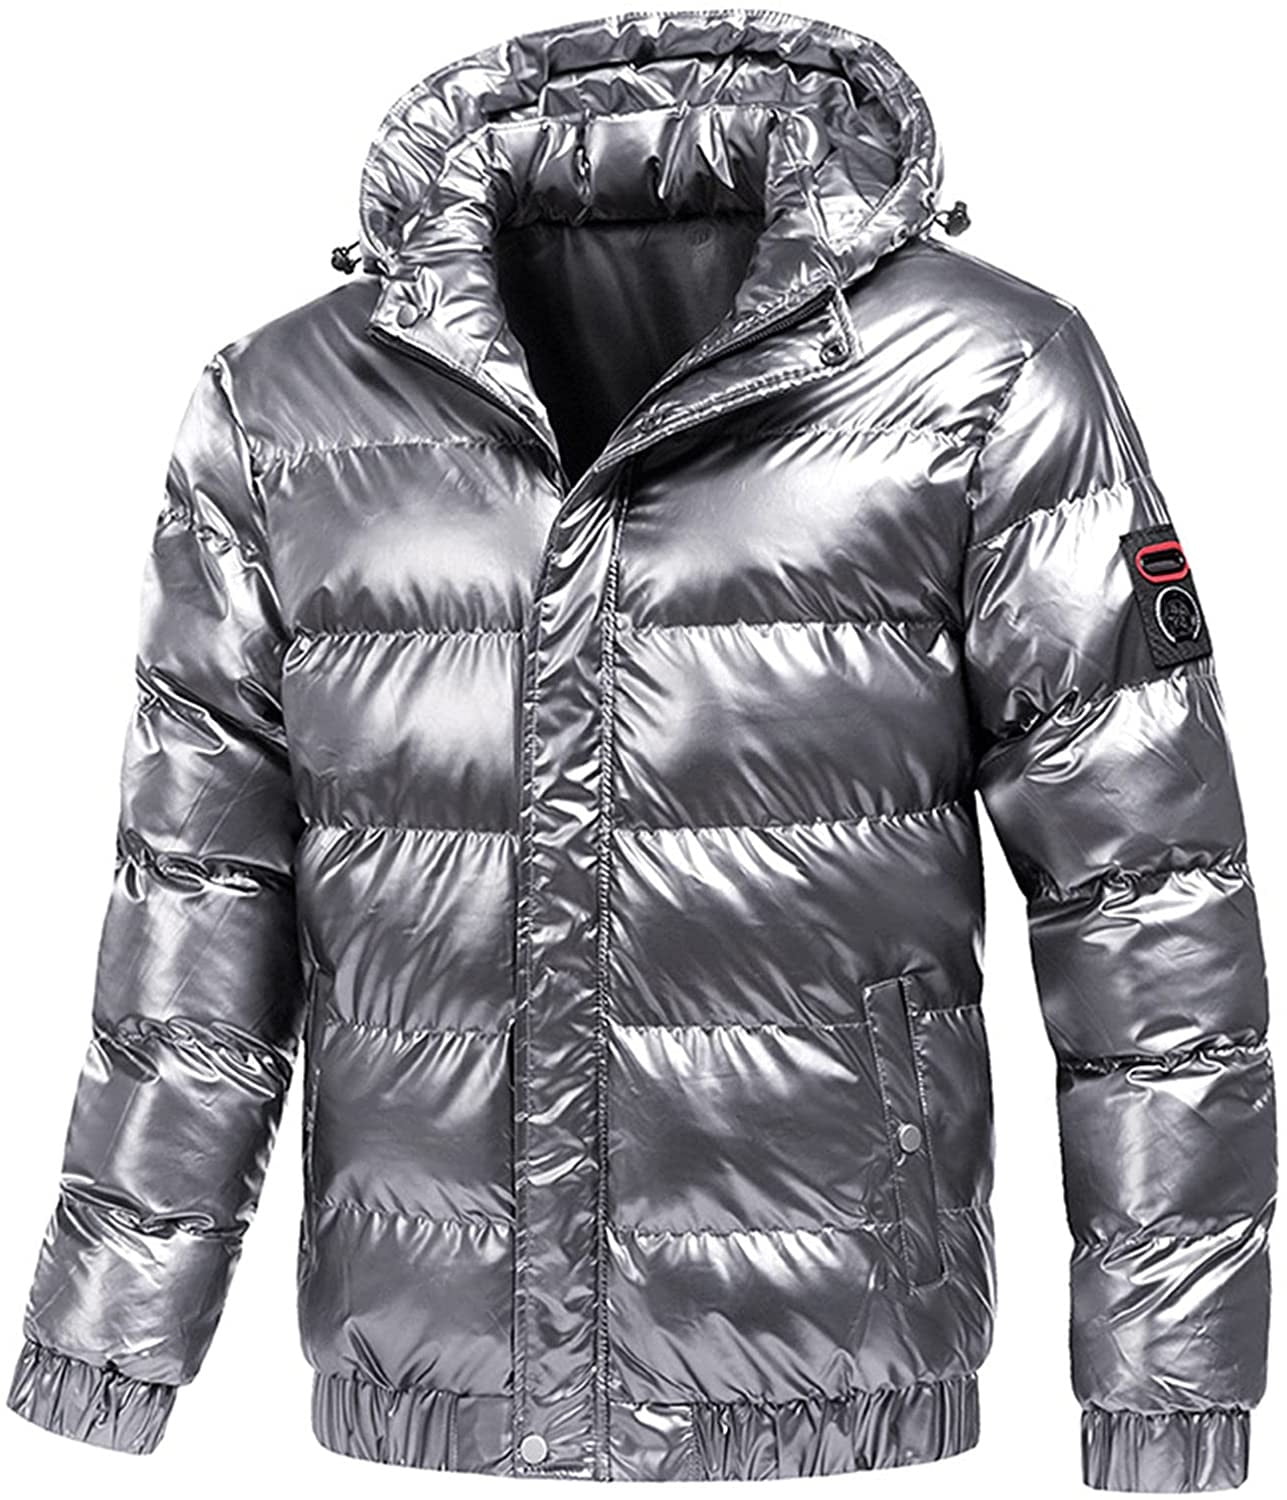 Leesechin Clearance Winter Jackets for Men Big & Tall Shiny Hooded  Reflective Down Jacket Cotton Jacket Gray 4XL